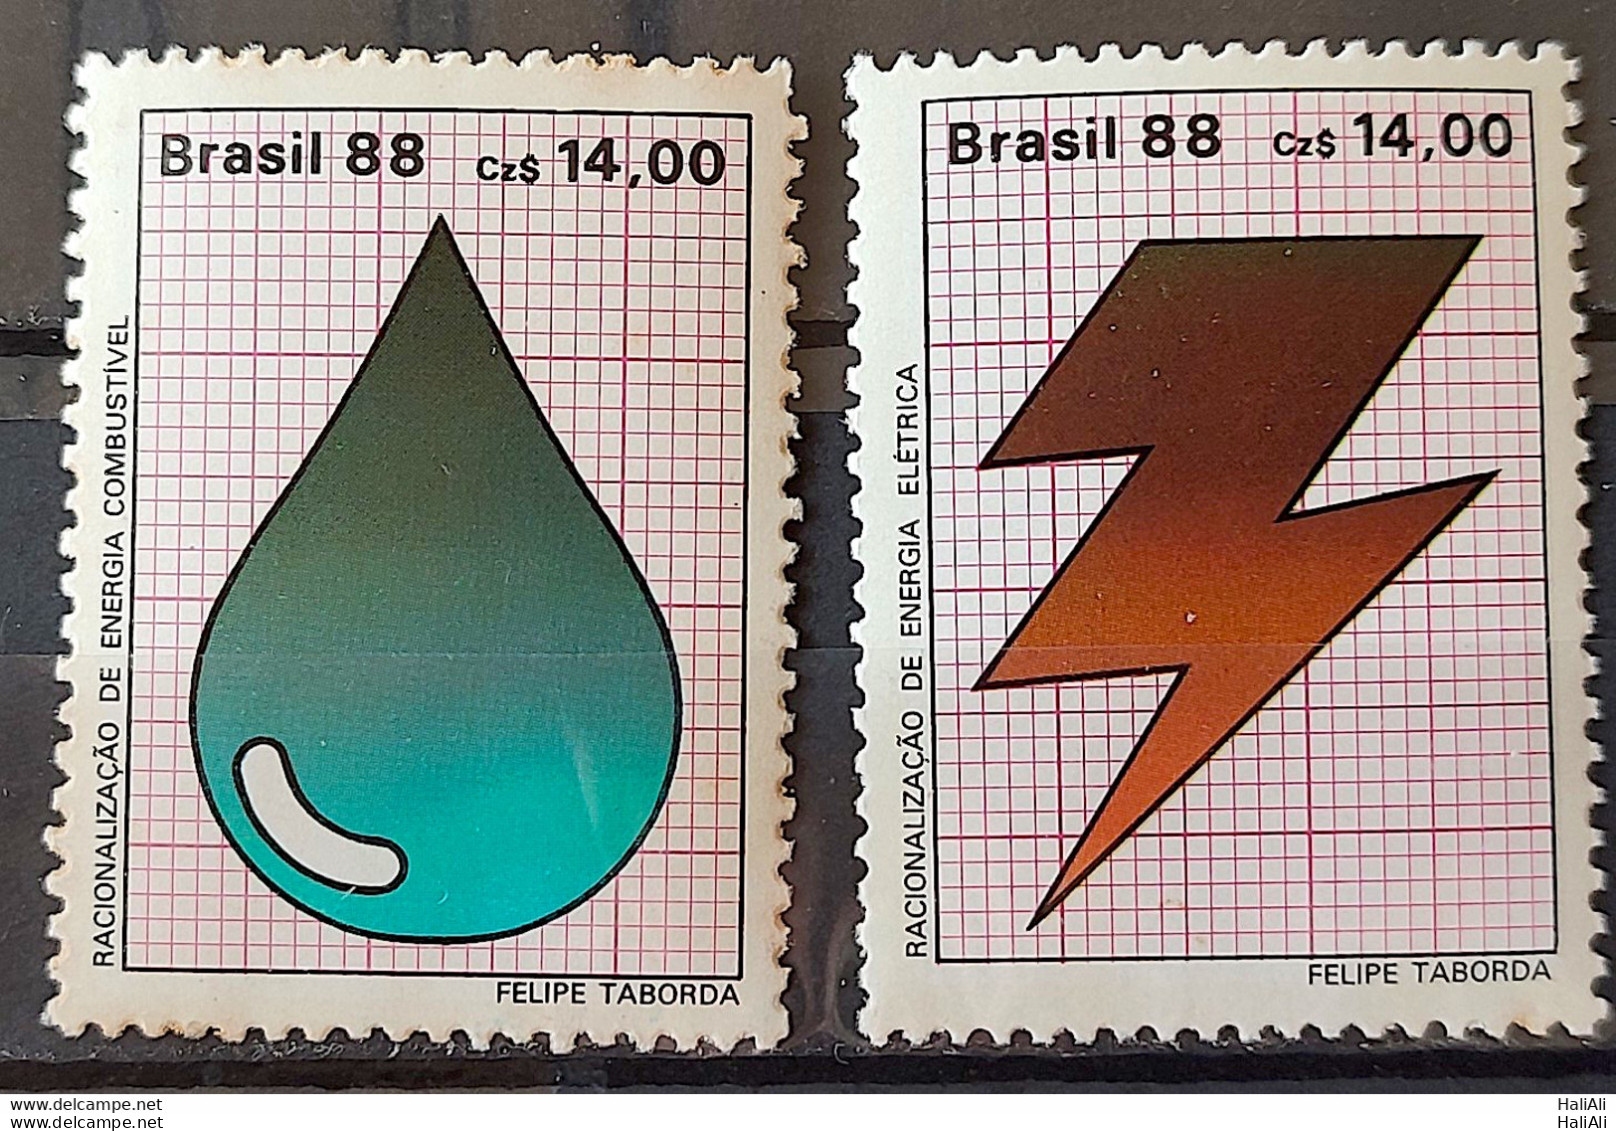 C 1579 Brazil Stamp Rationalization Of Petroleum Energy Electricity 1988 Complete Series 2 - Unused Stamps